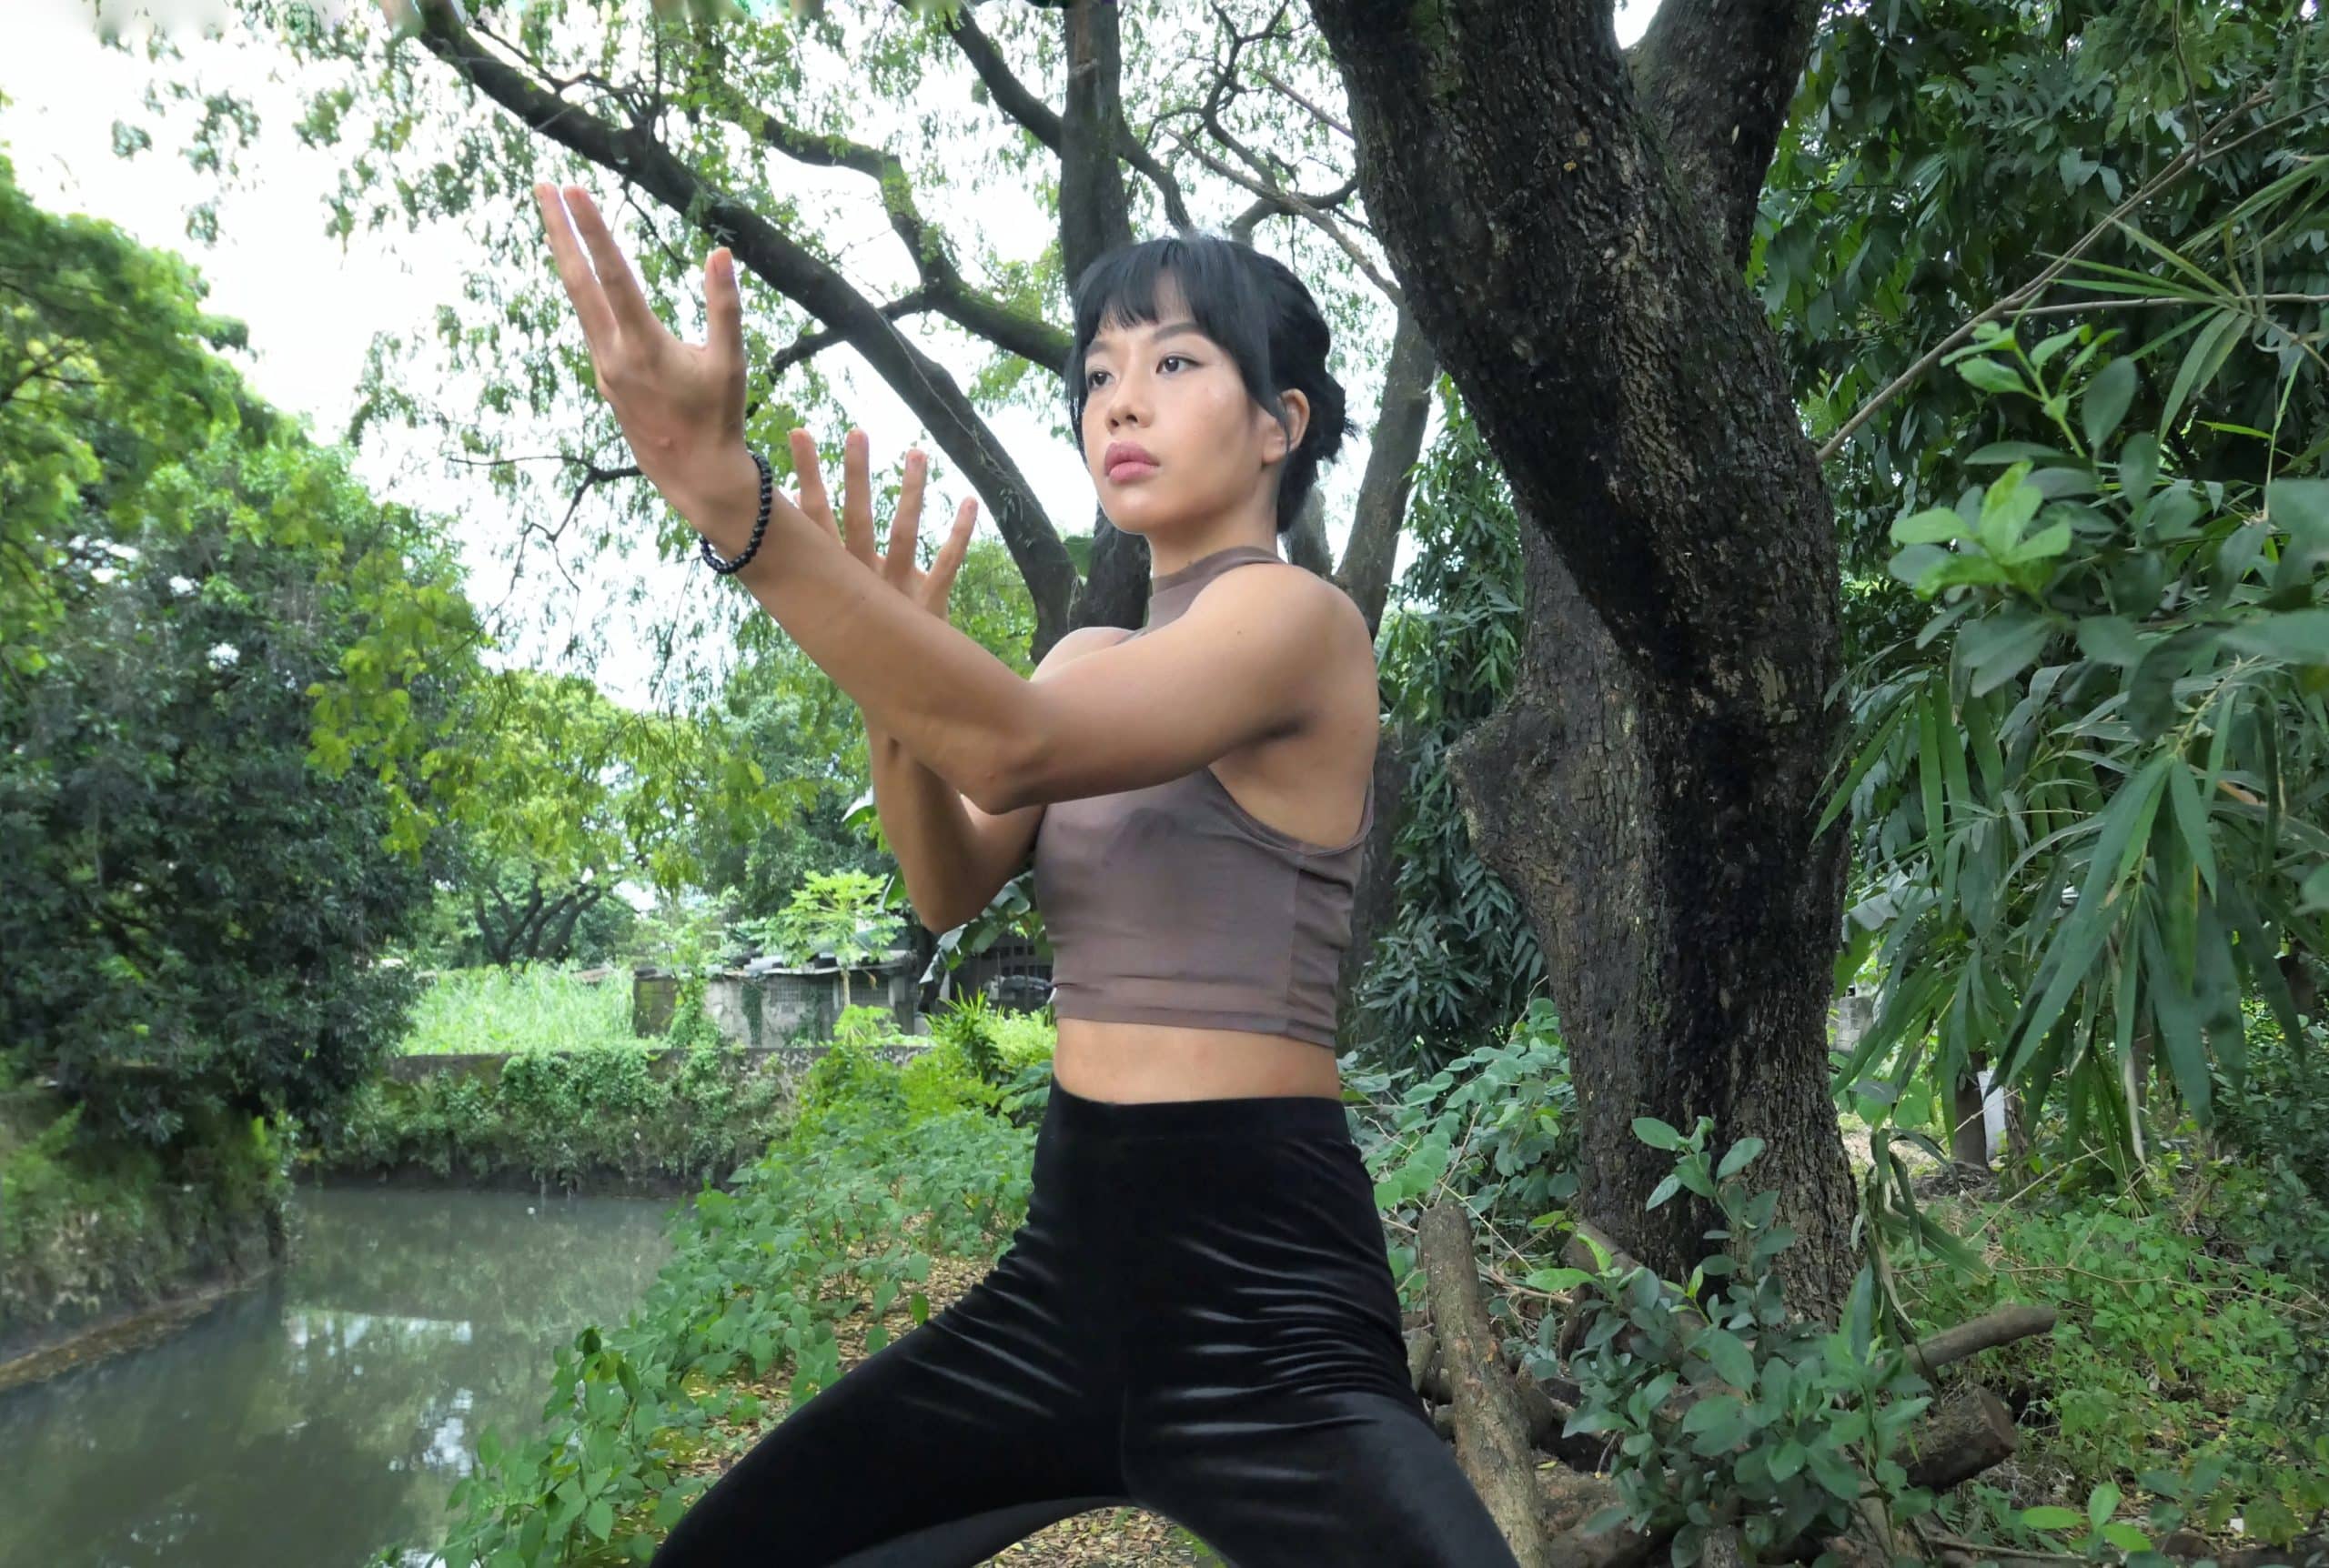 A dancer practicing qigong surrounded by nature